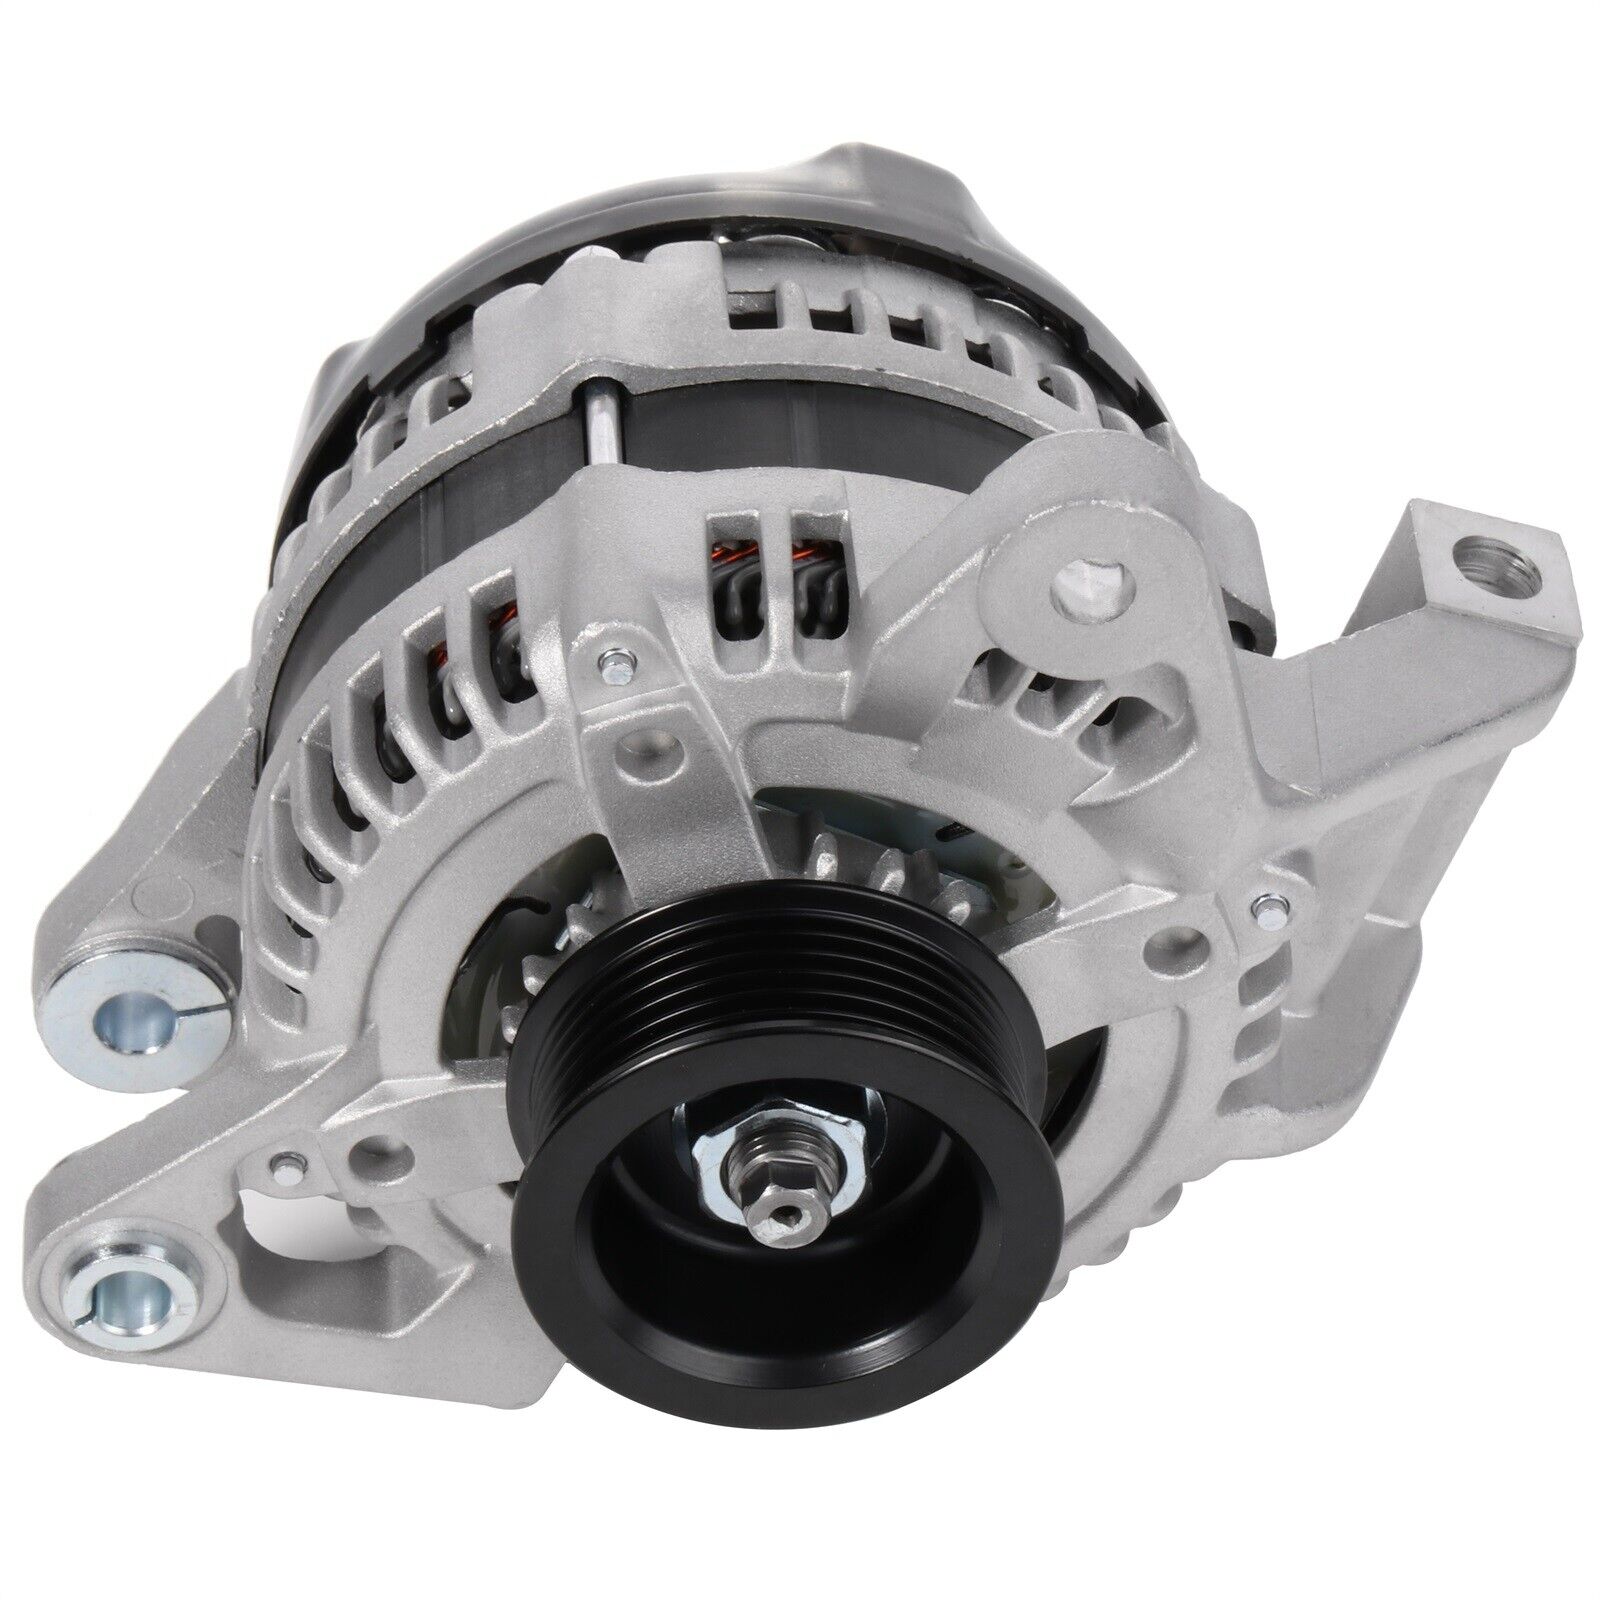 Alternator for Cadillac DTS/Buick Lucerne 2006-2010 4.6L 150AMP 104210-4370 CW